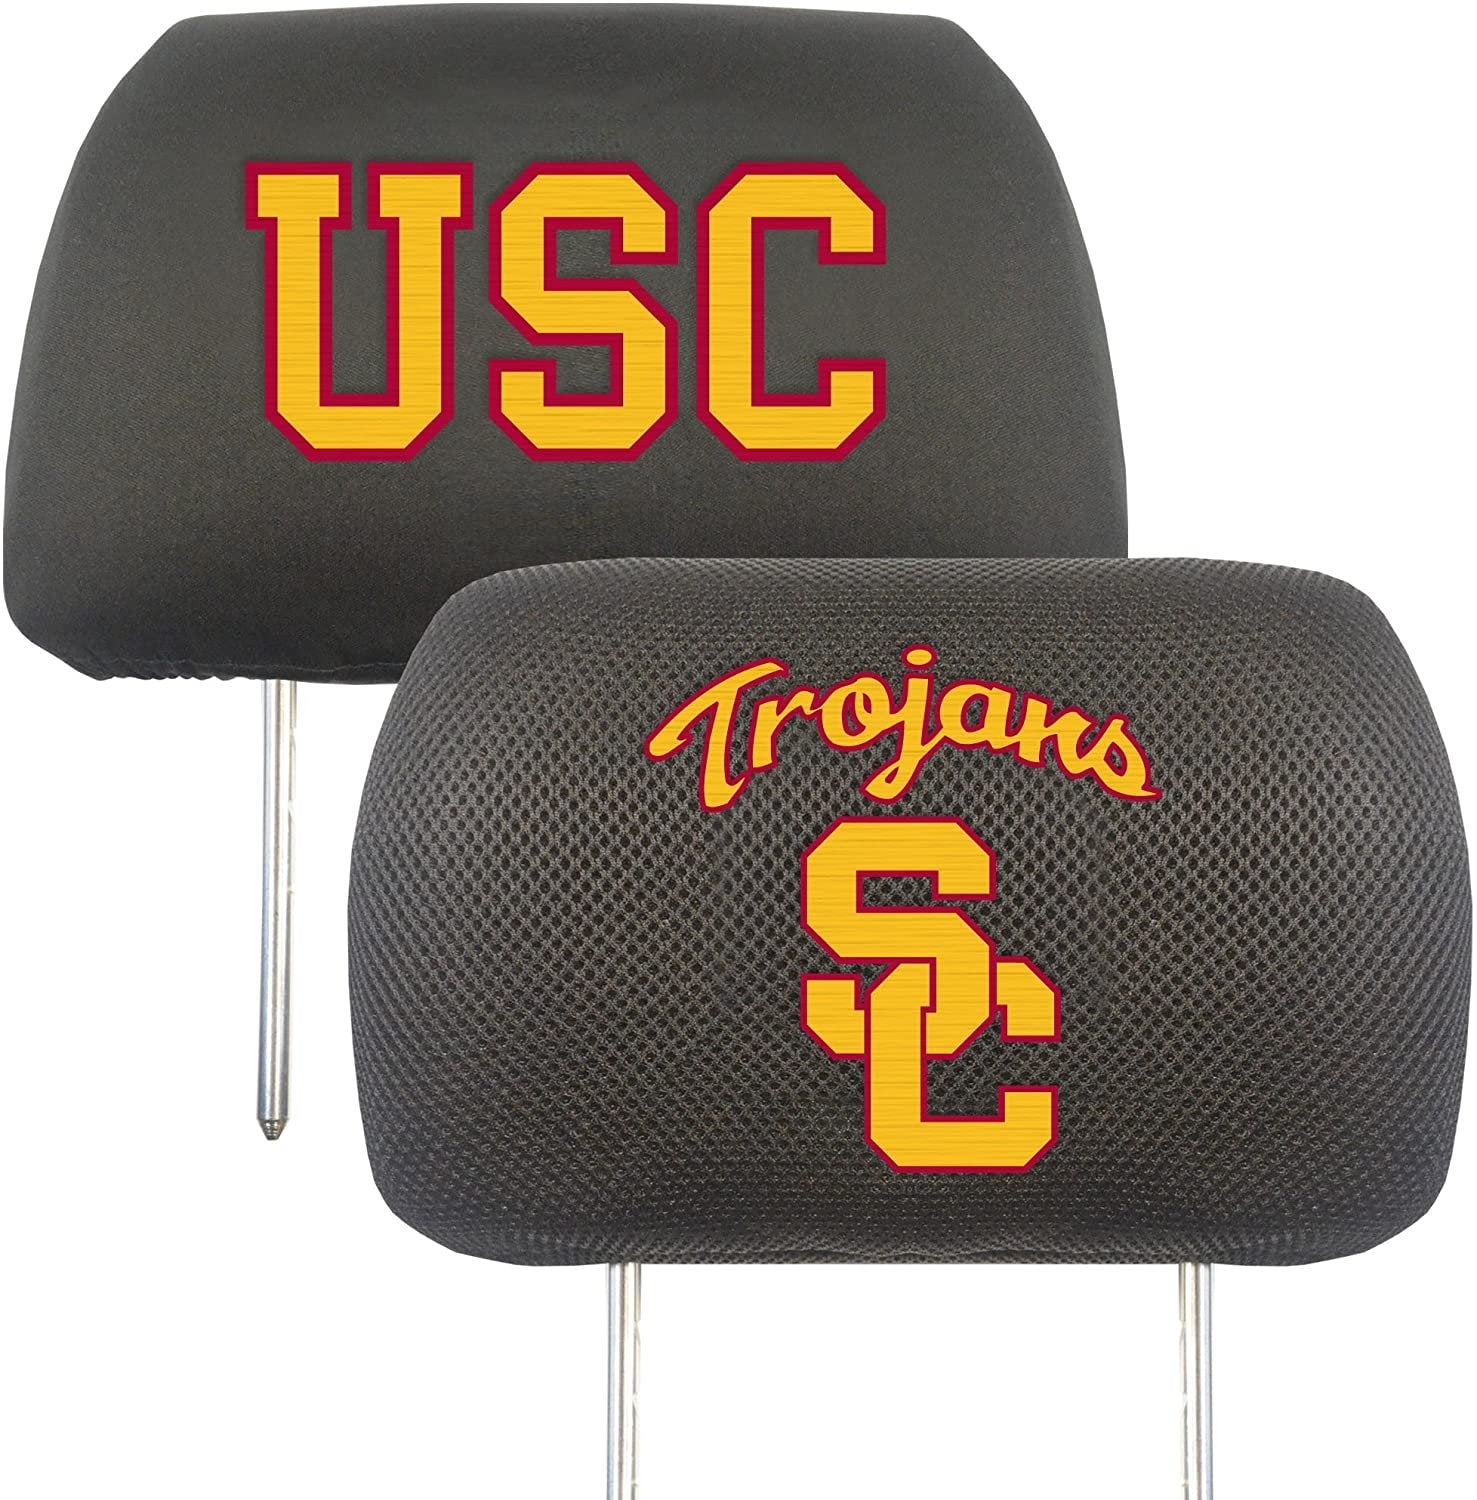 University of Southern California USC Trojans Pair of Premium Auto Head Rest Covers, Embroidered, Black Elastic, 14x10 Inch